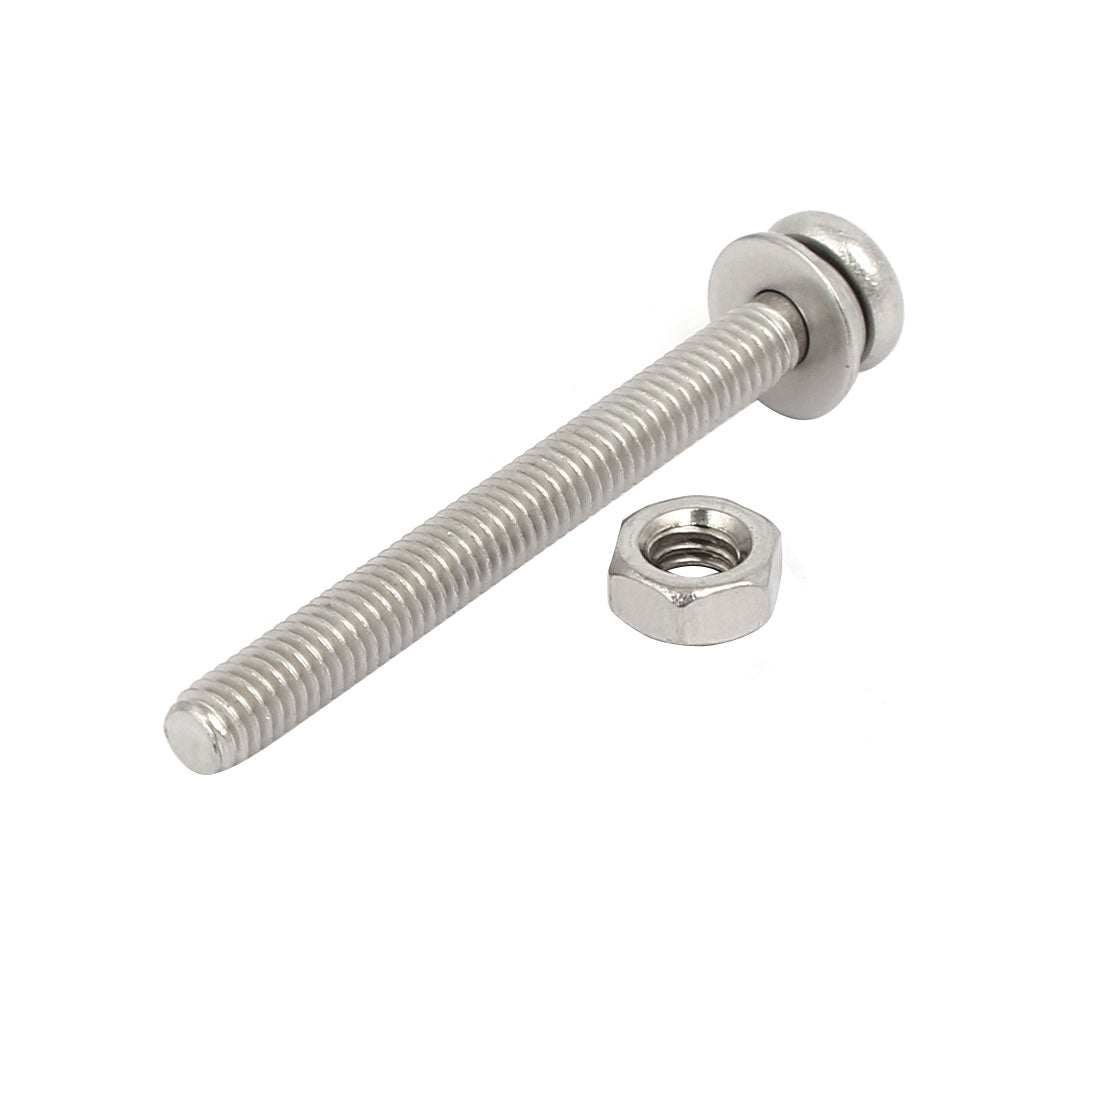 uxcell Uxcell M4x40mm 304 Stainless Steel Phillips Pan Head Bolt Screw Nut w Washer 20 Sets